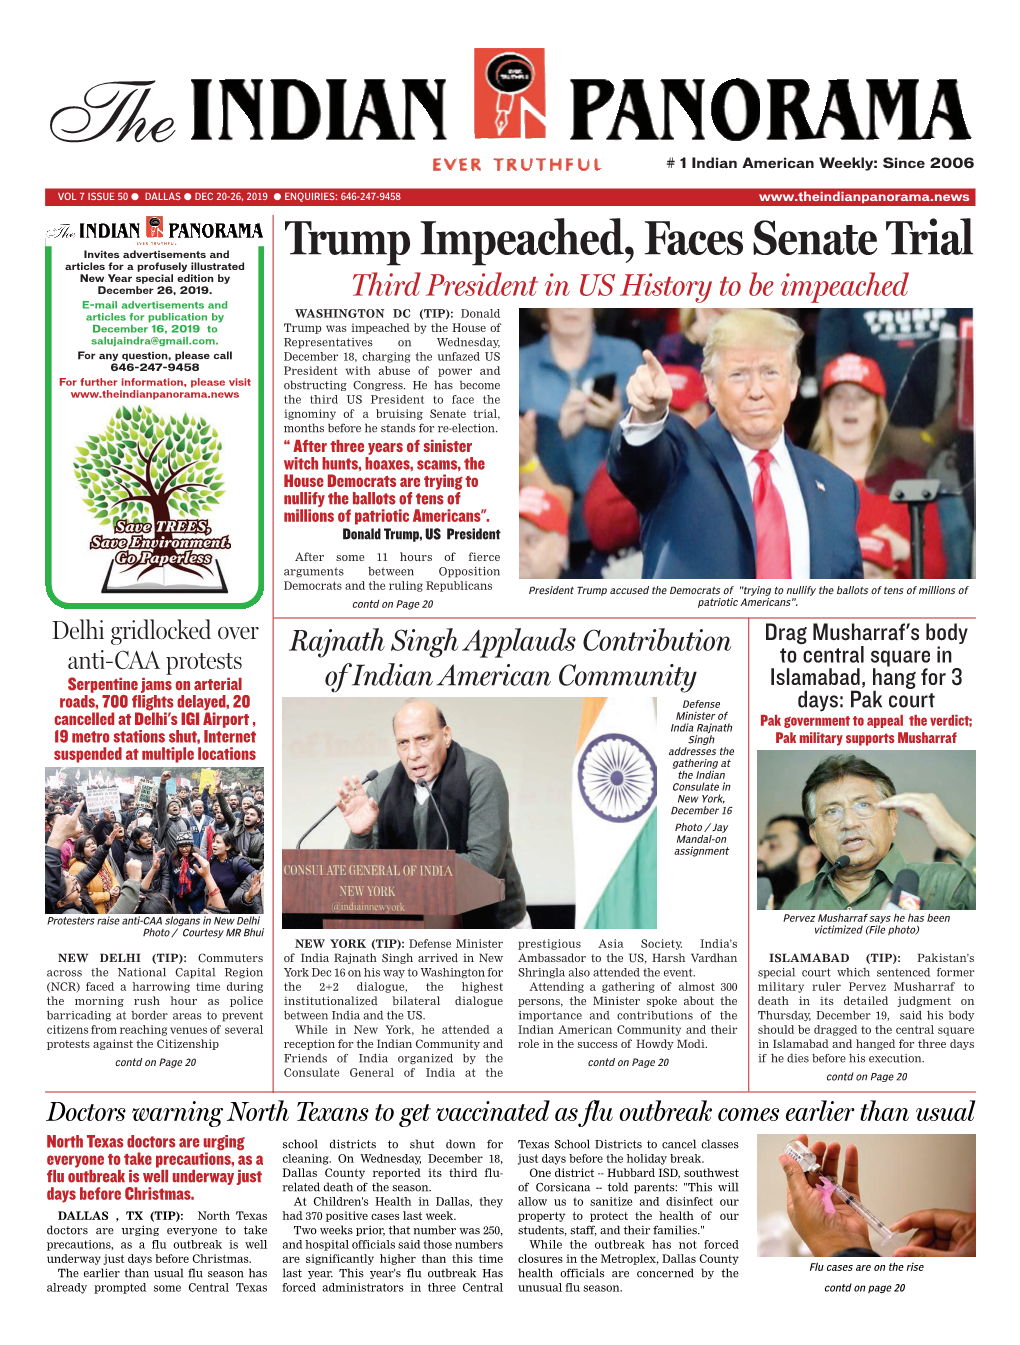 Trump Impeached, Faces Senate Trial Articles for a Profusely Illustrated New Year Special Edition by December 26, 2019